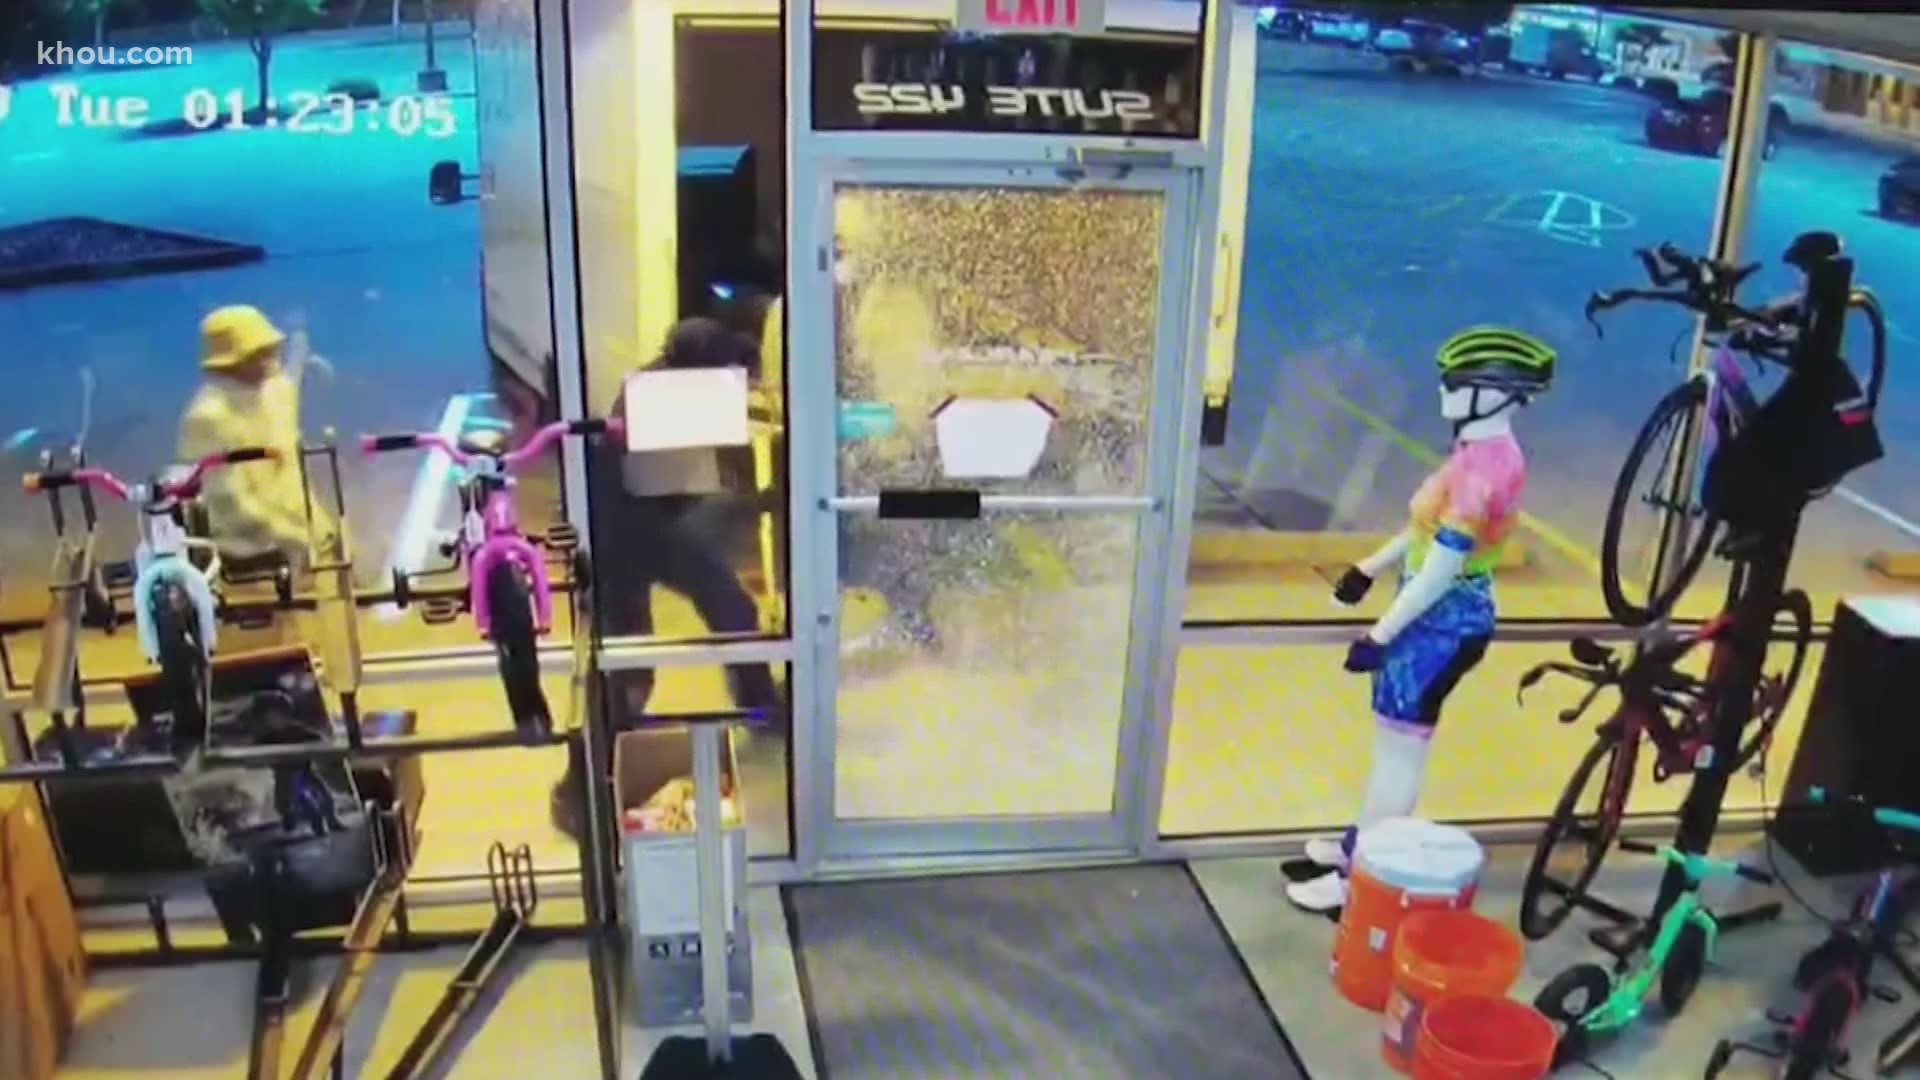 Burglars have hit bike shops in Pearland, The Woodlands, Missouri City and Sugar Land all within the last month.